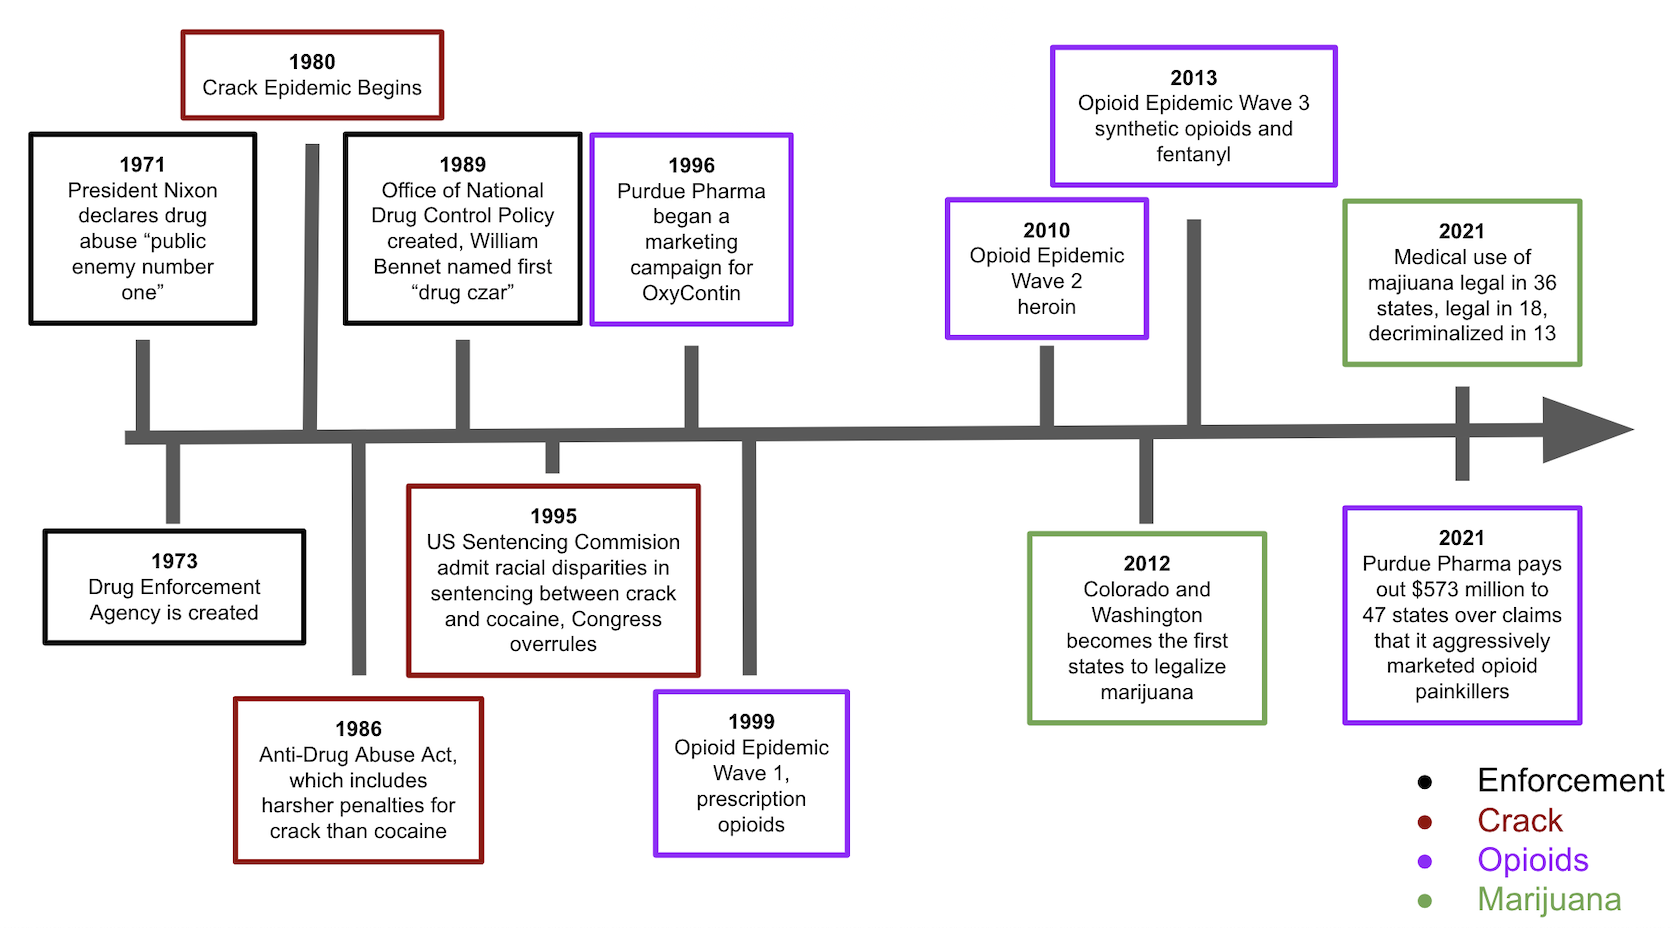 Timeline of Key Drug-Related Events from 1971 to 2021